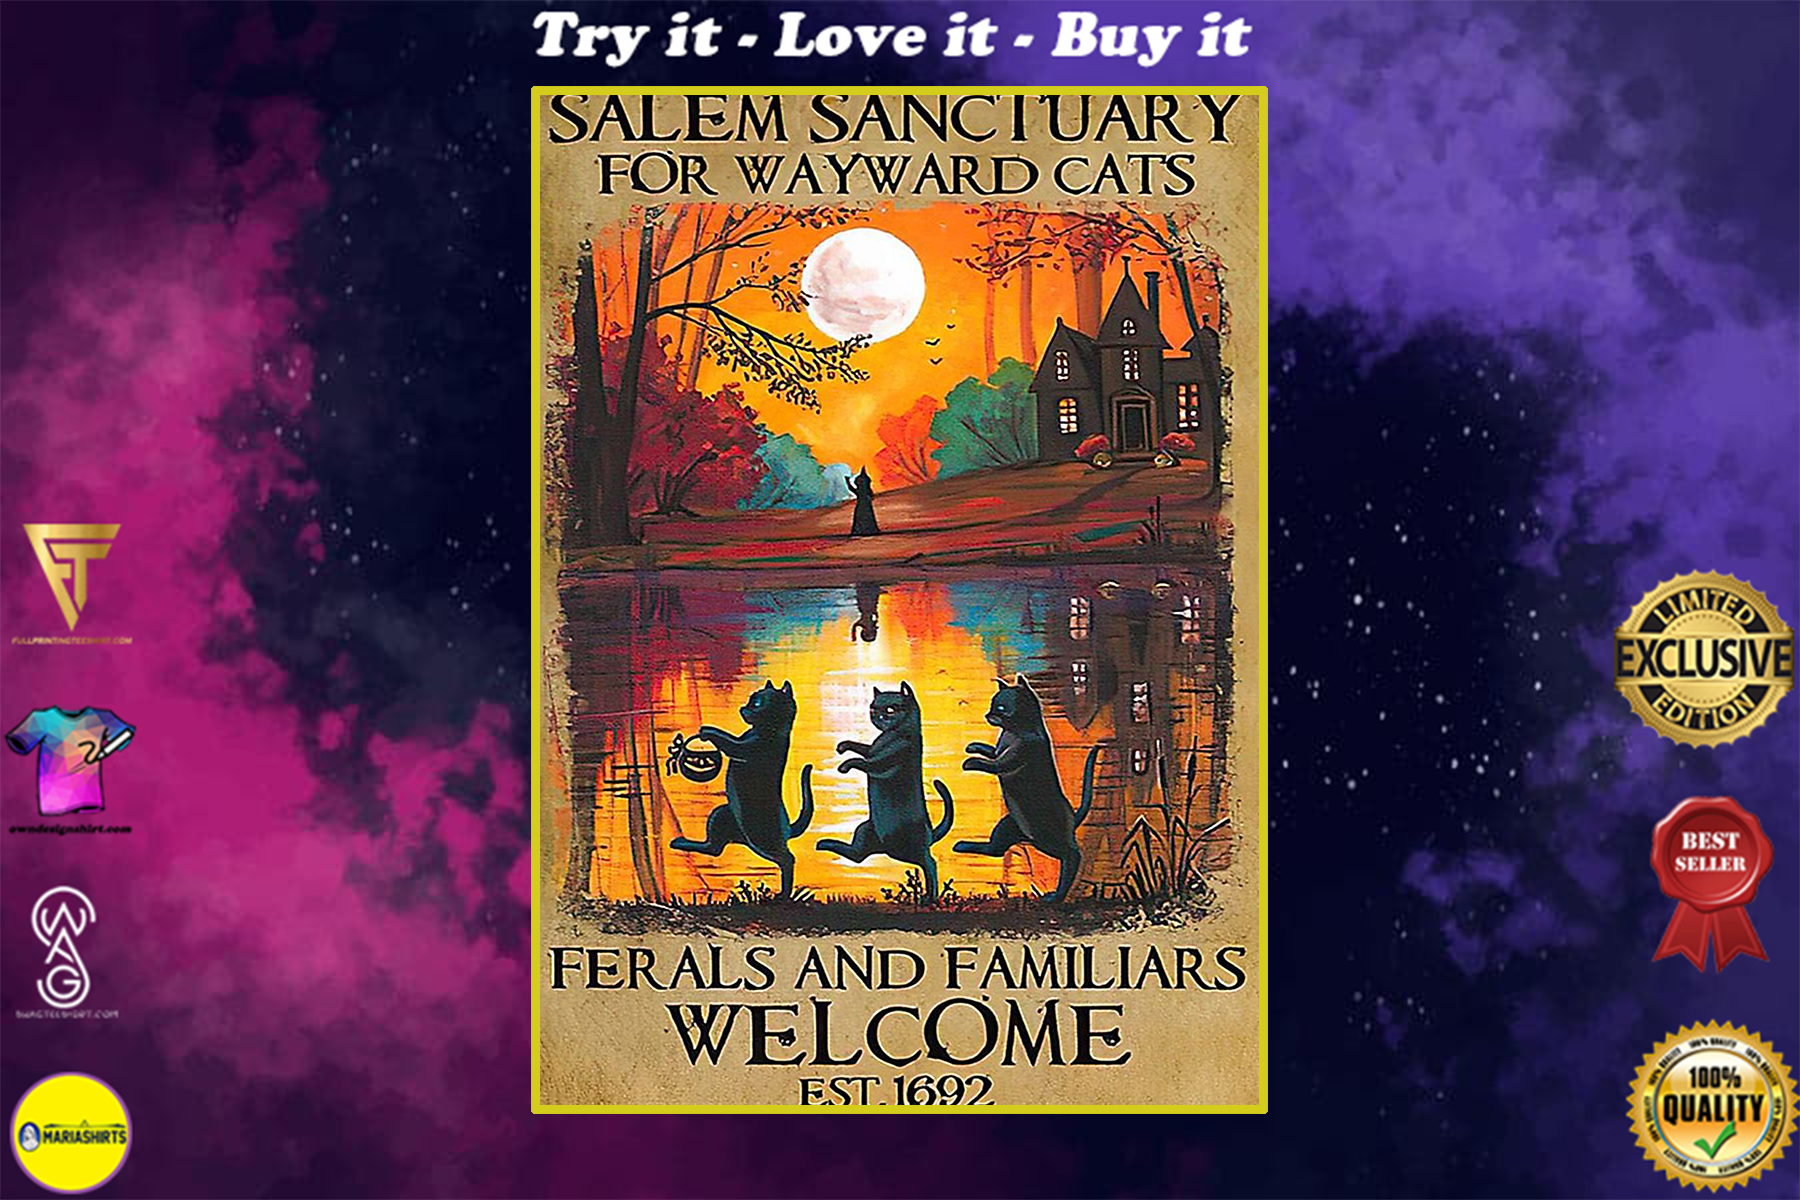 vintage salem sanctuary for wayward cats ferals and familiars welcome est 1692 black witch cat poster